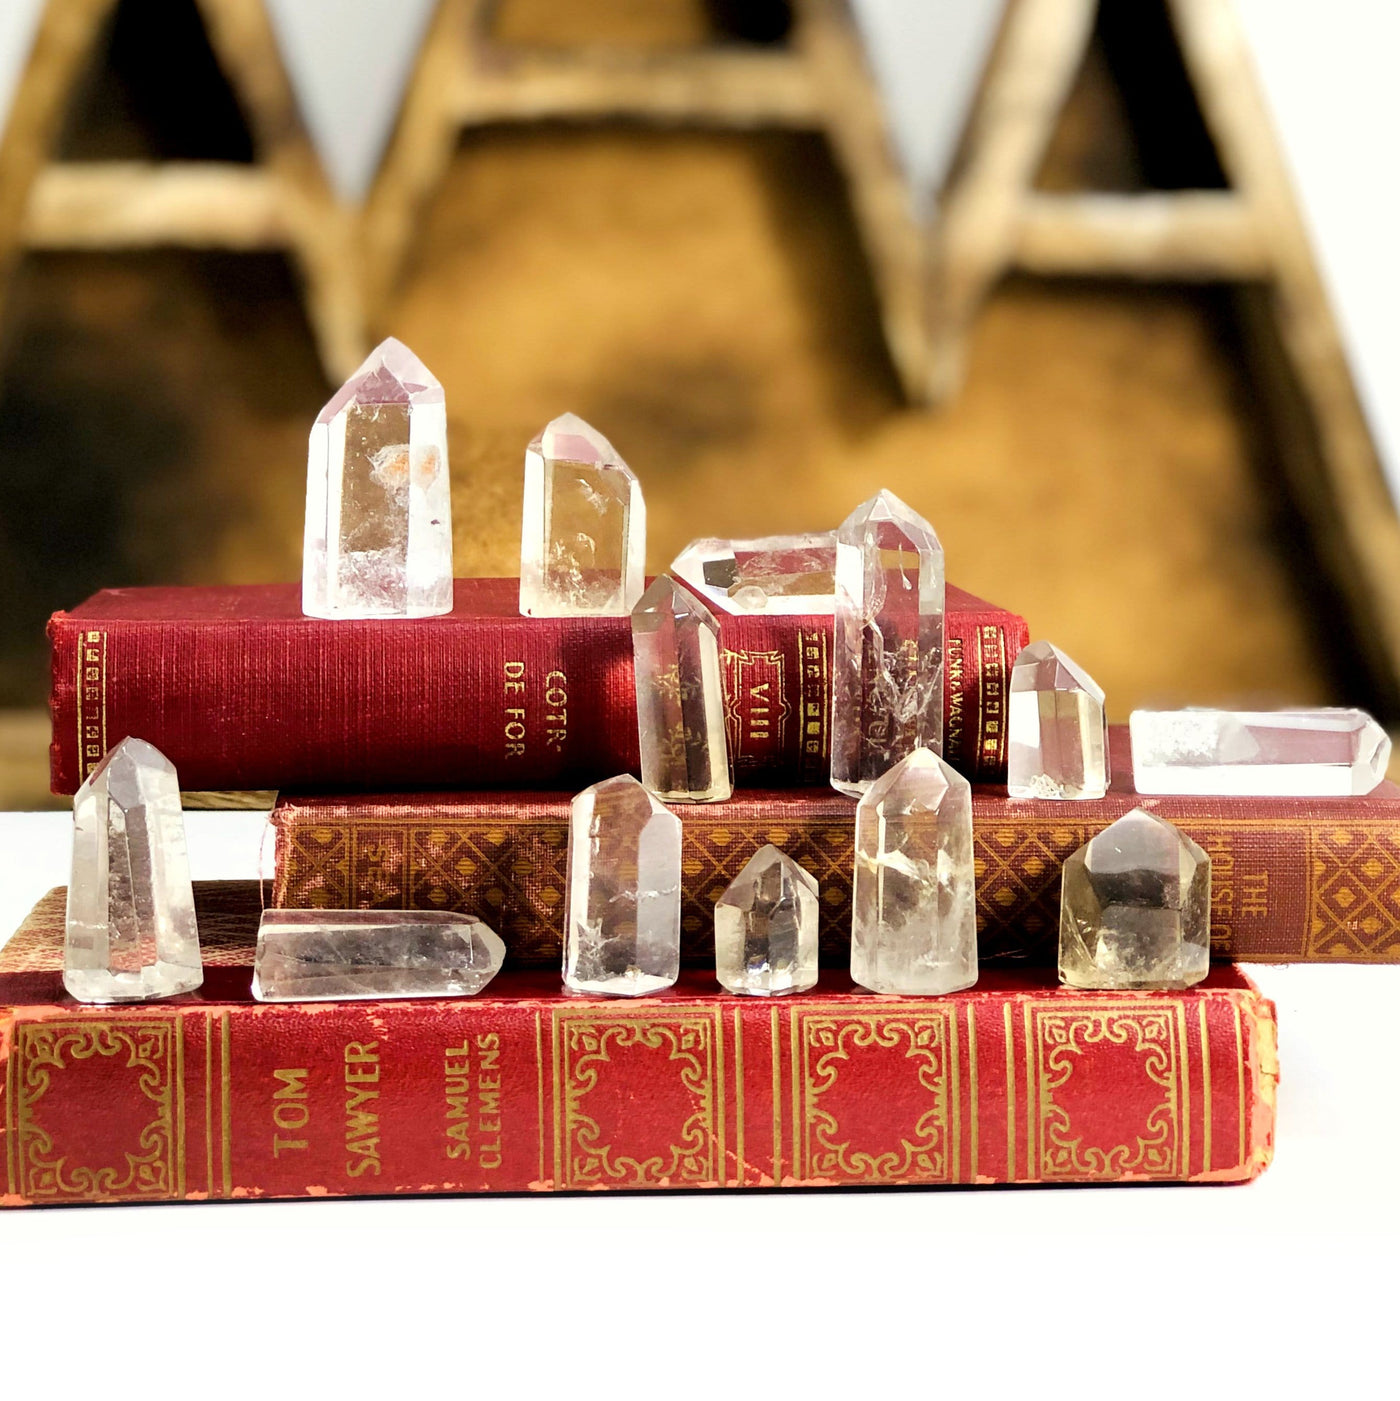 Crystal Quartz Polished Points layed out on books, showing range of variation of stock available